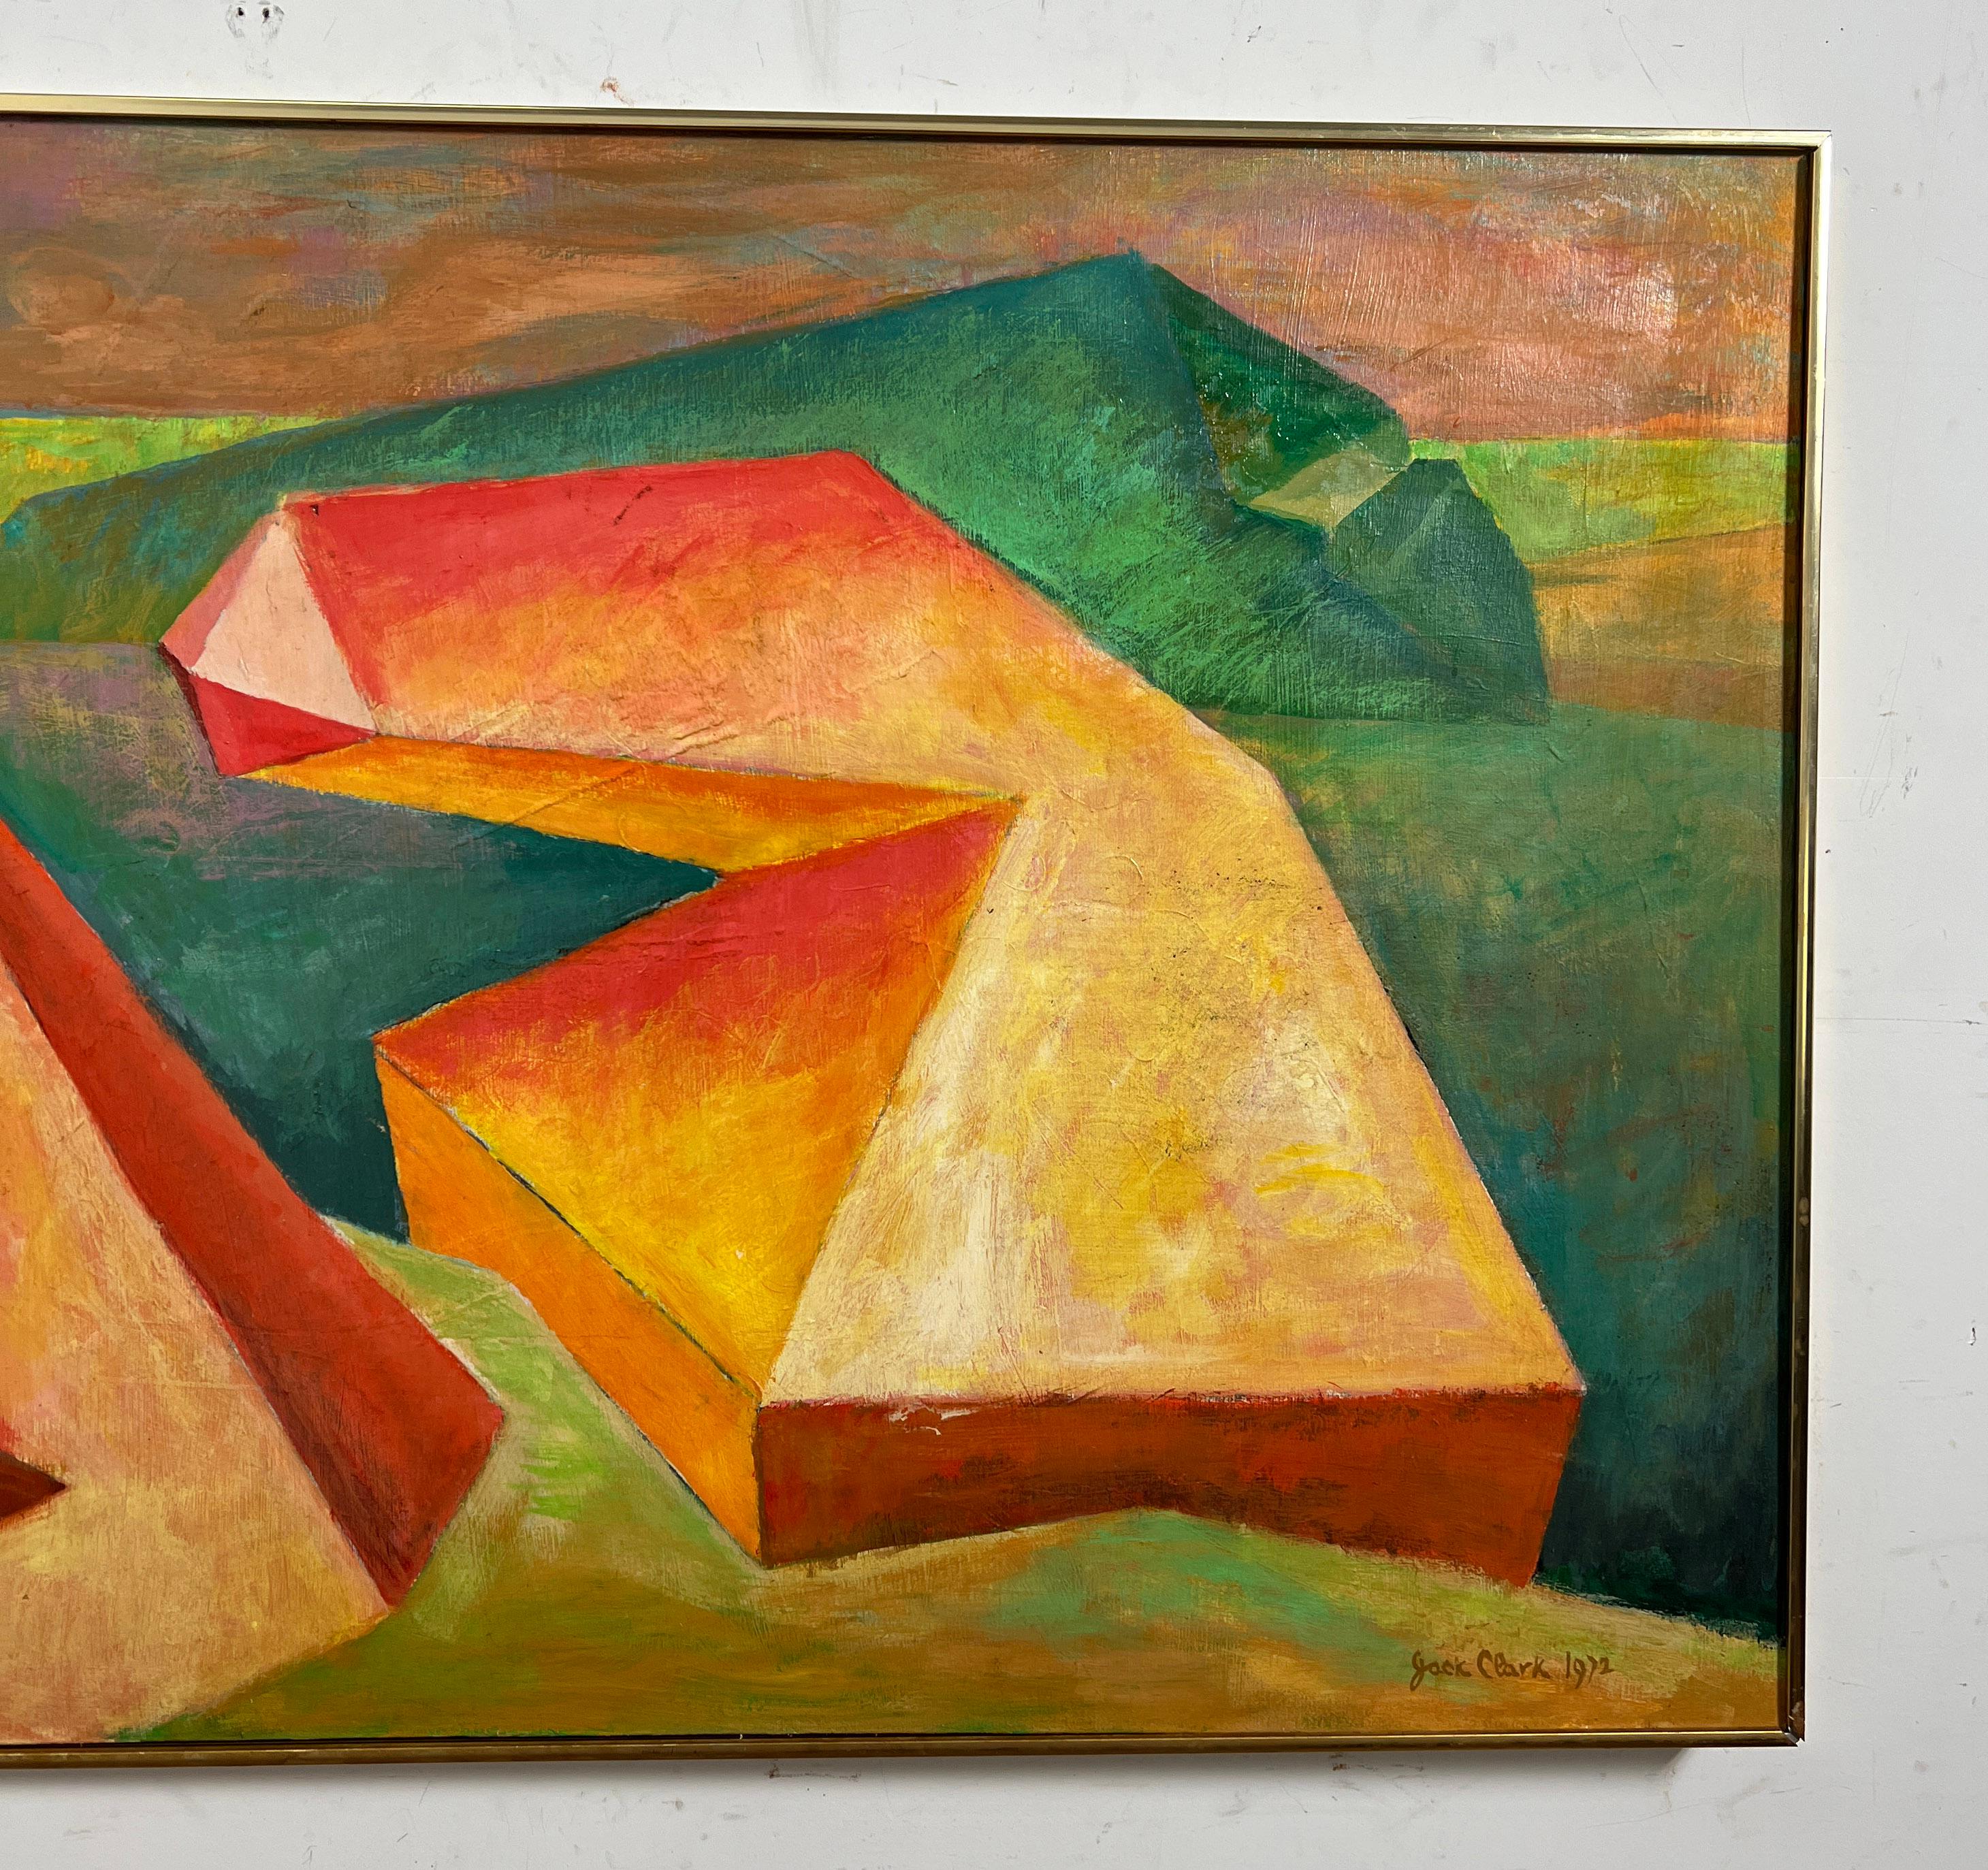 Mid-Century Modern Large Cubist Landscape Abstract Painting Signed Jack Clark, d. 1972 For Sale